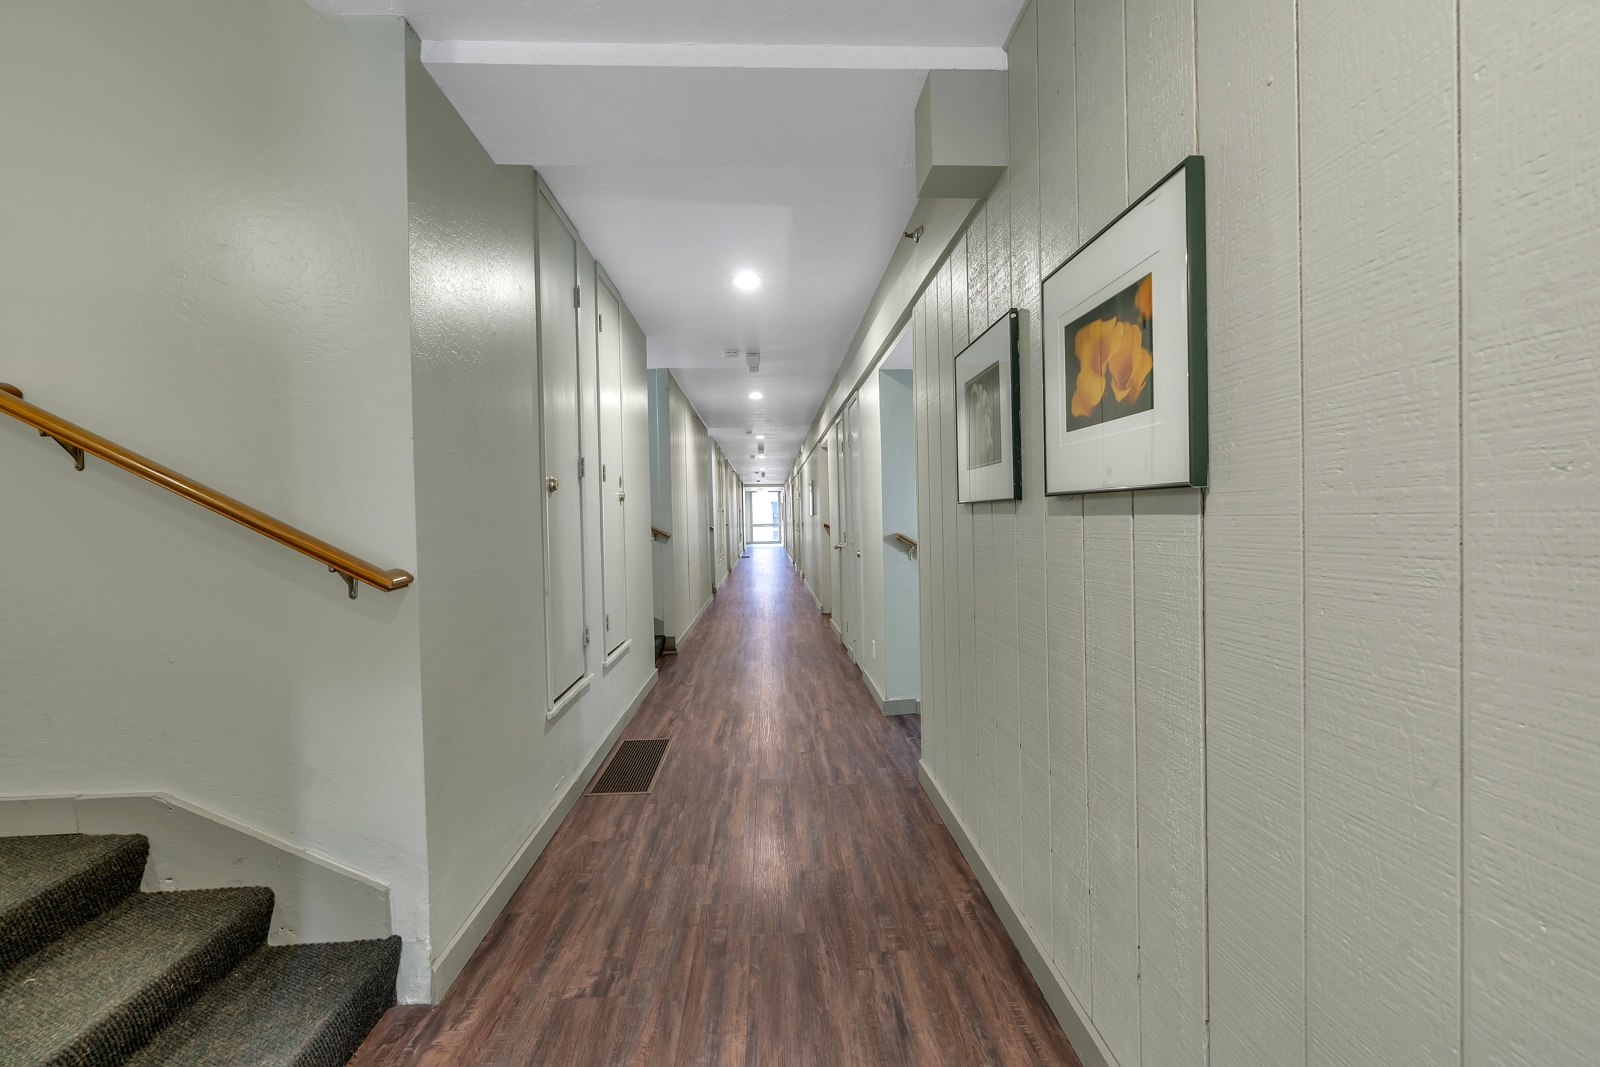 Feel welcomed by a well-lit entry hallway